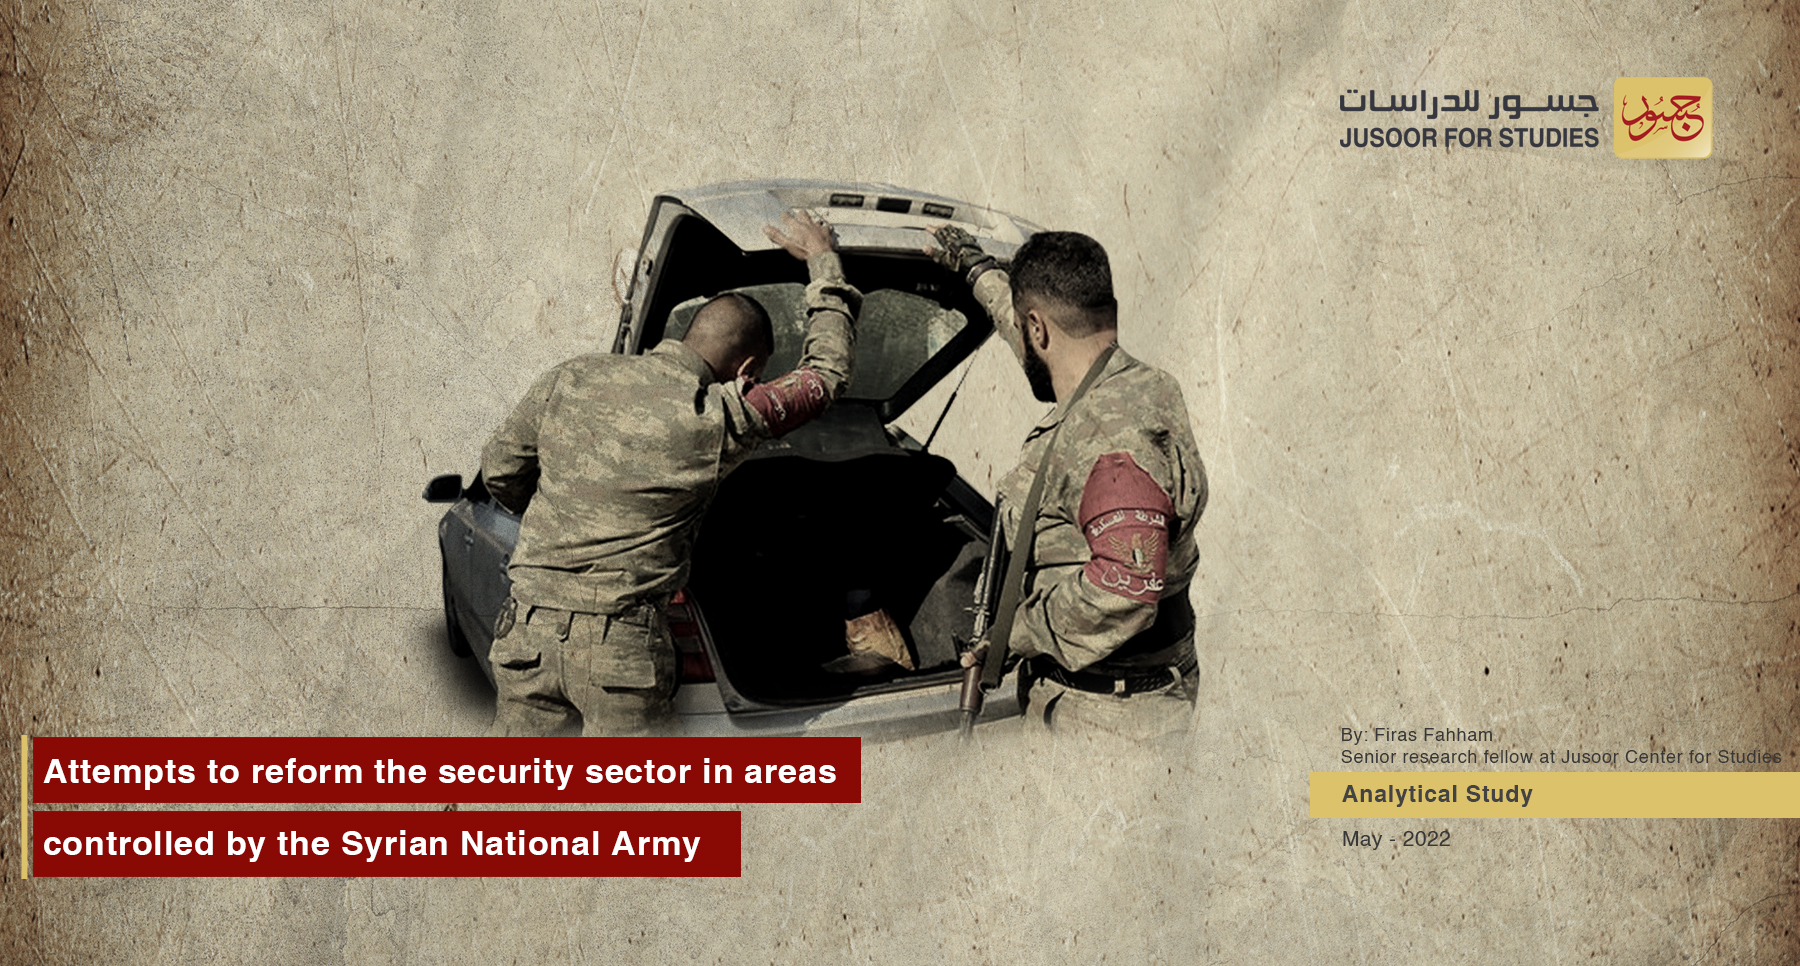 Attempts to reform the security sector in areas controlled by the Syrian National Army